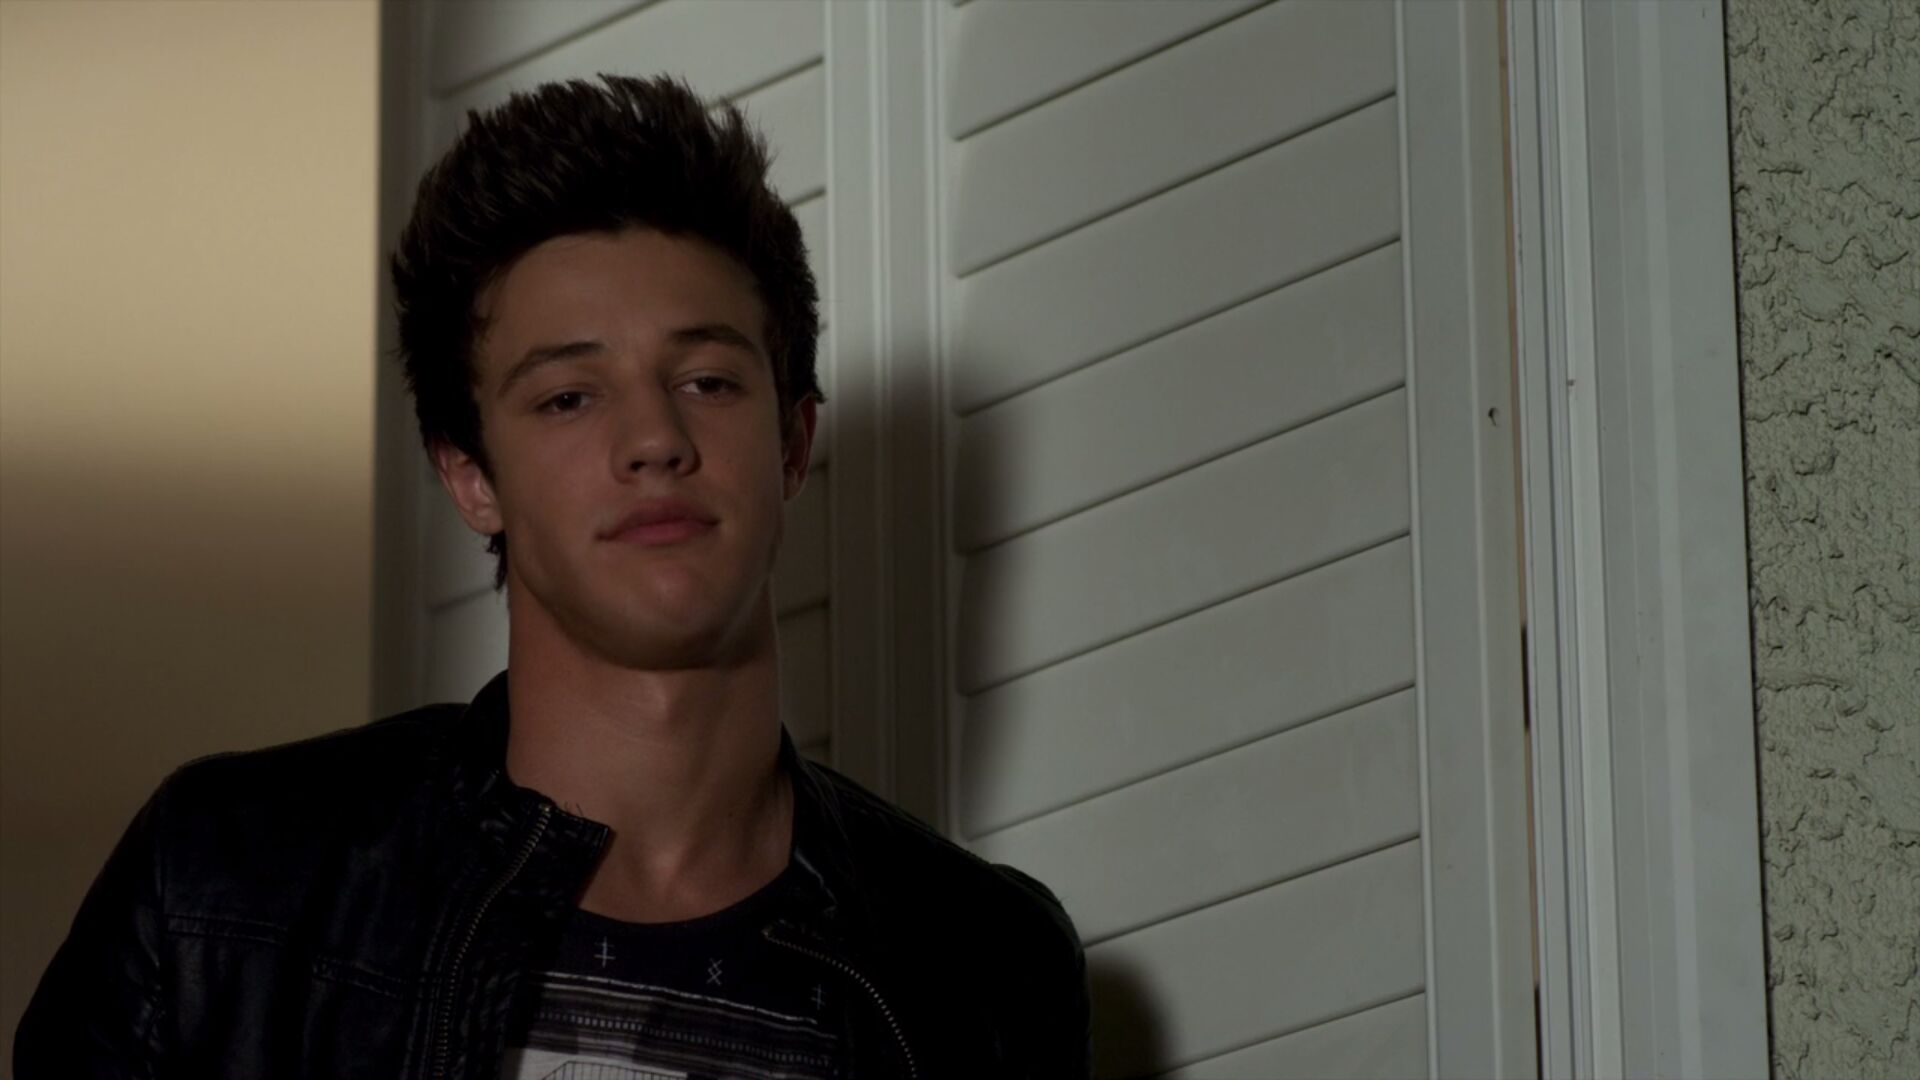 Cameron Dallas in Expelled - Picture 62 of 80. 